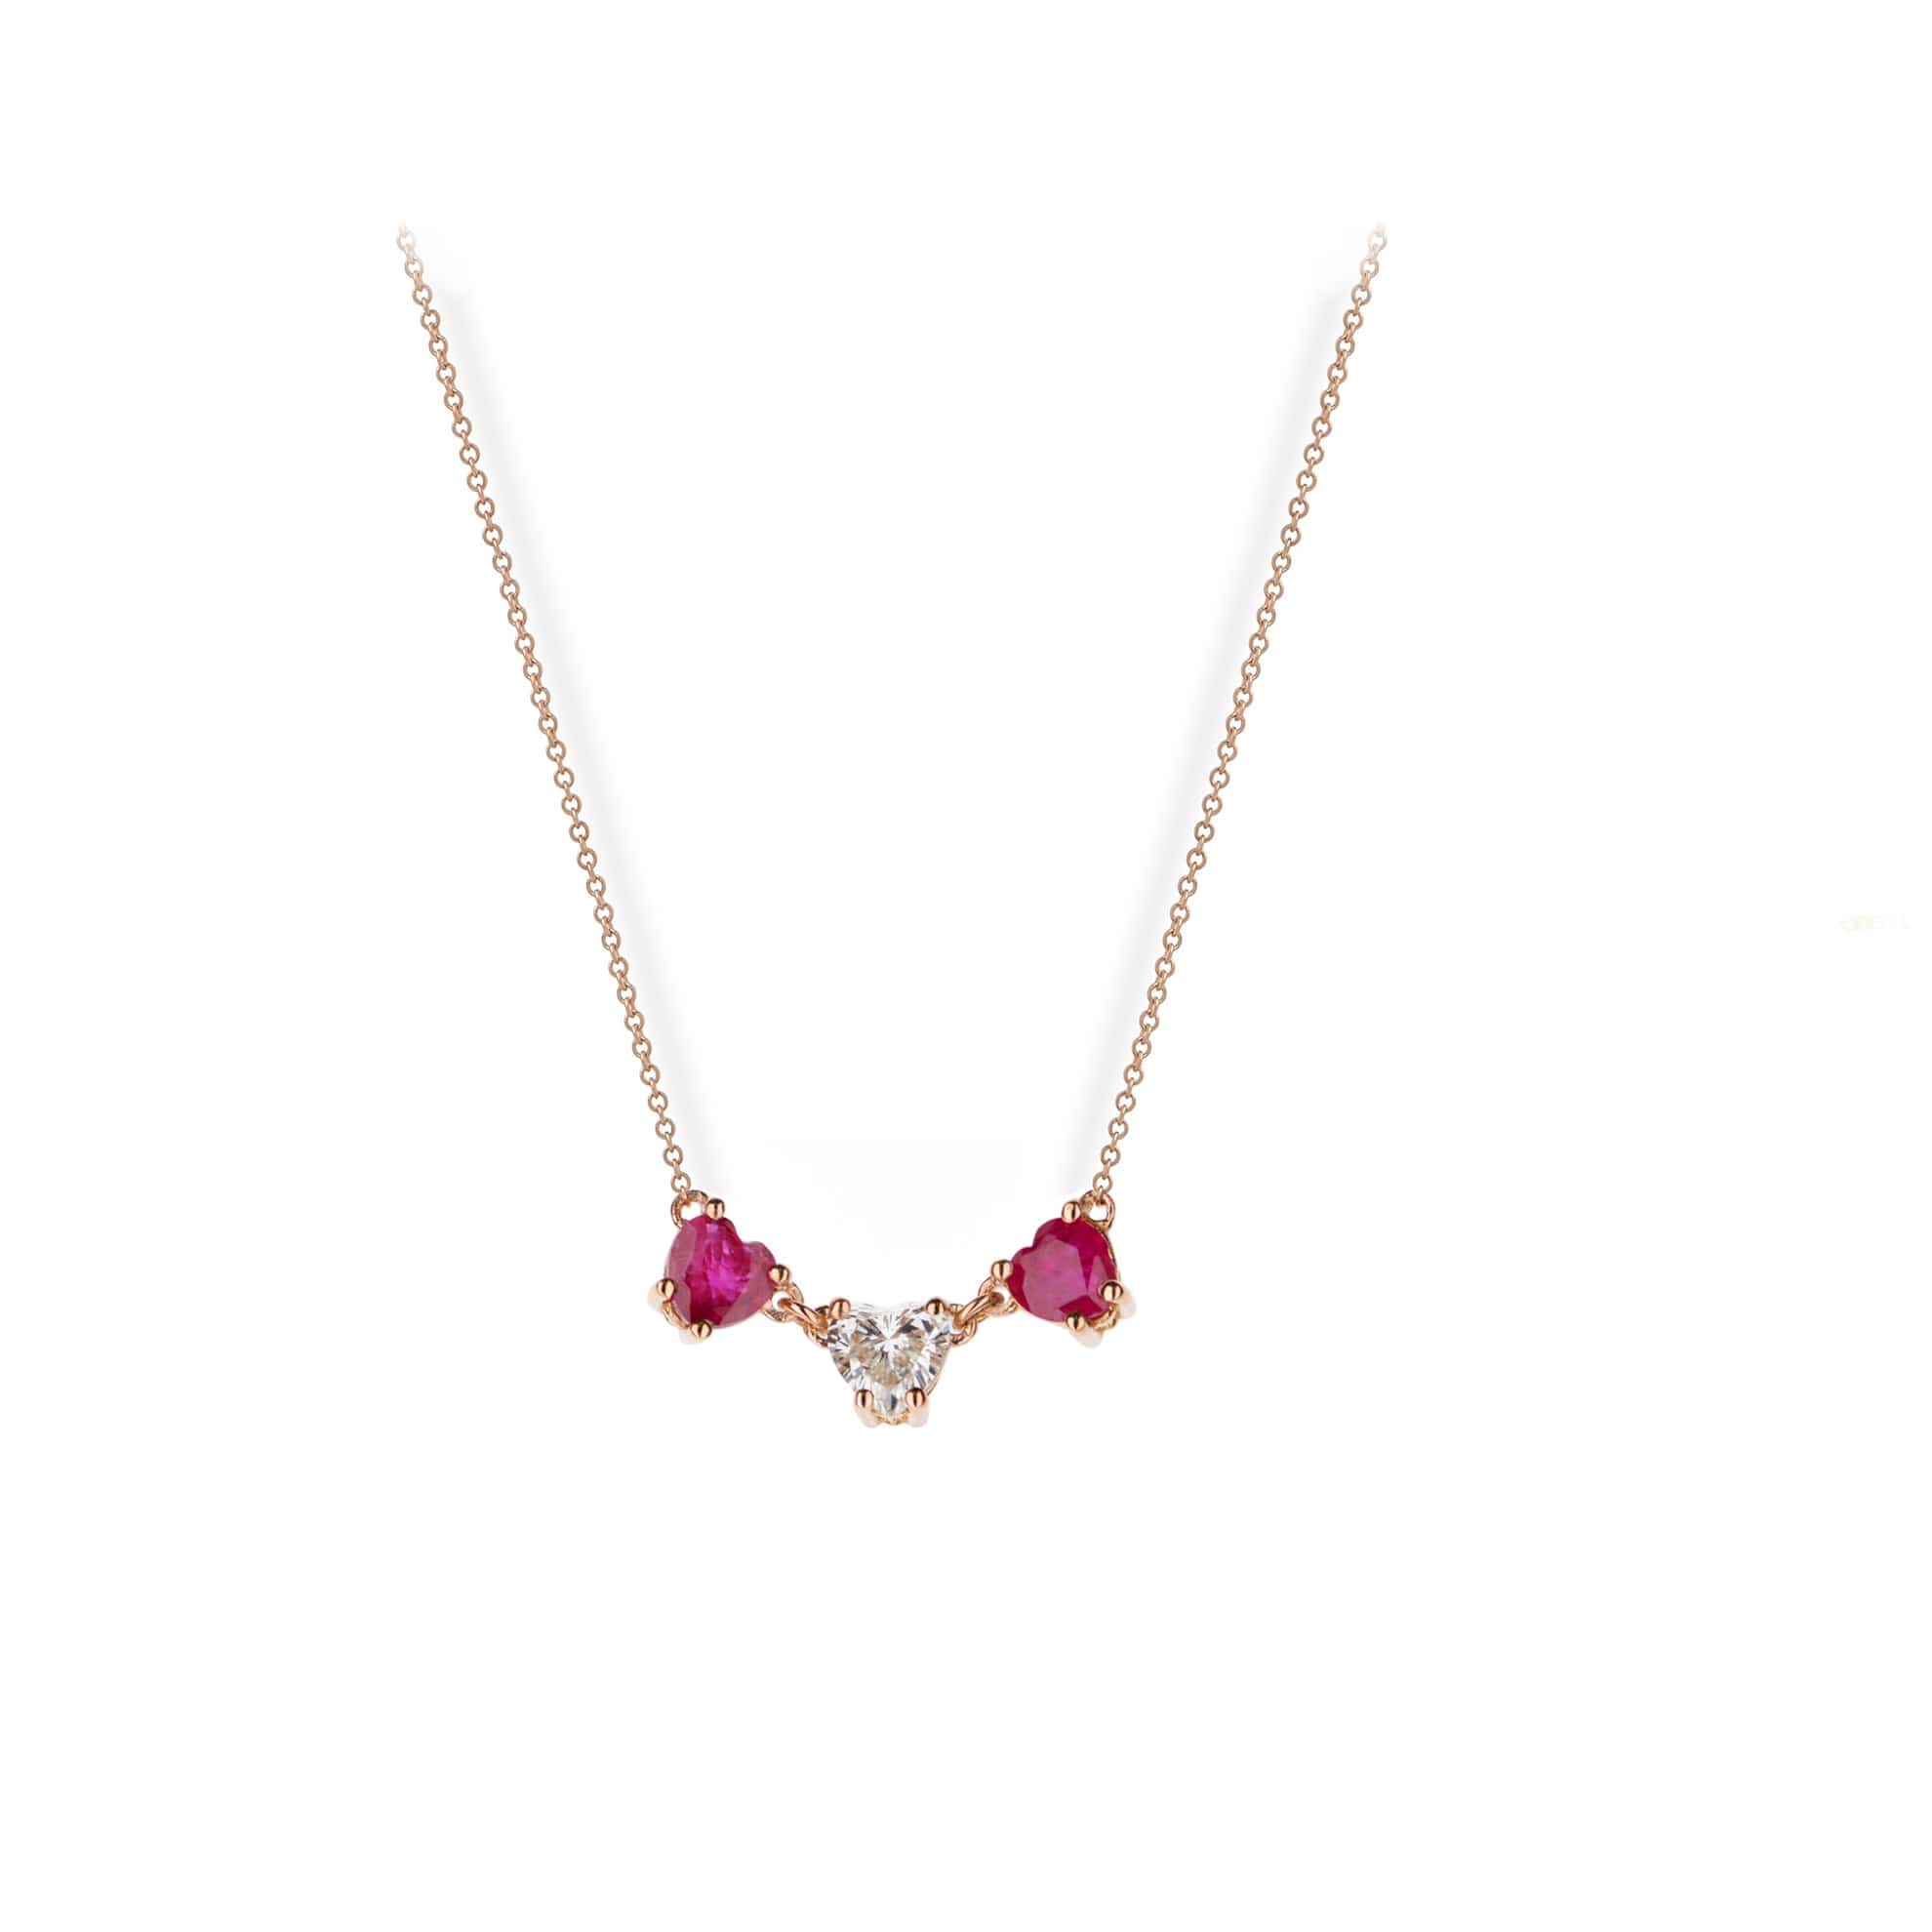 M. Fitaihi Candy Royal Ruby Necklace - M.Fitaihi